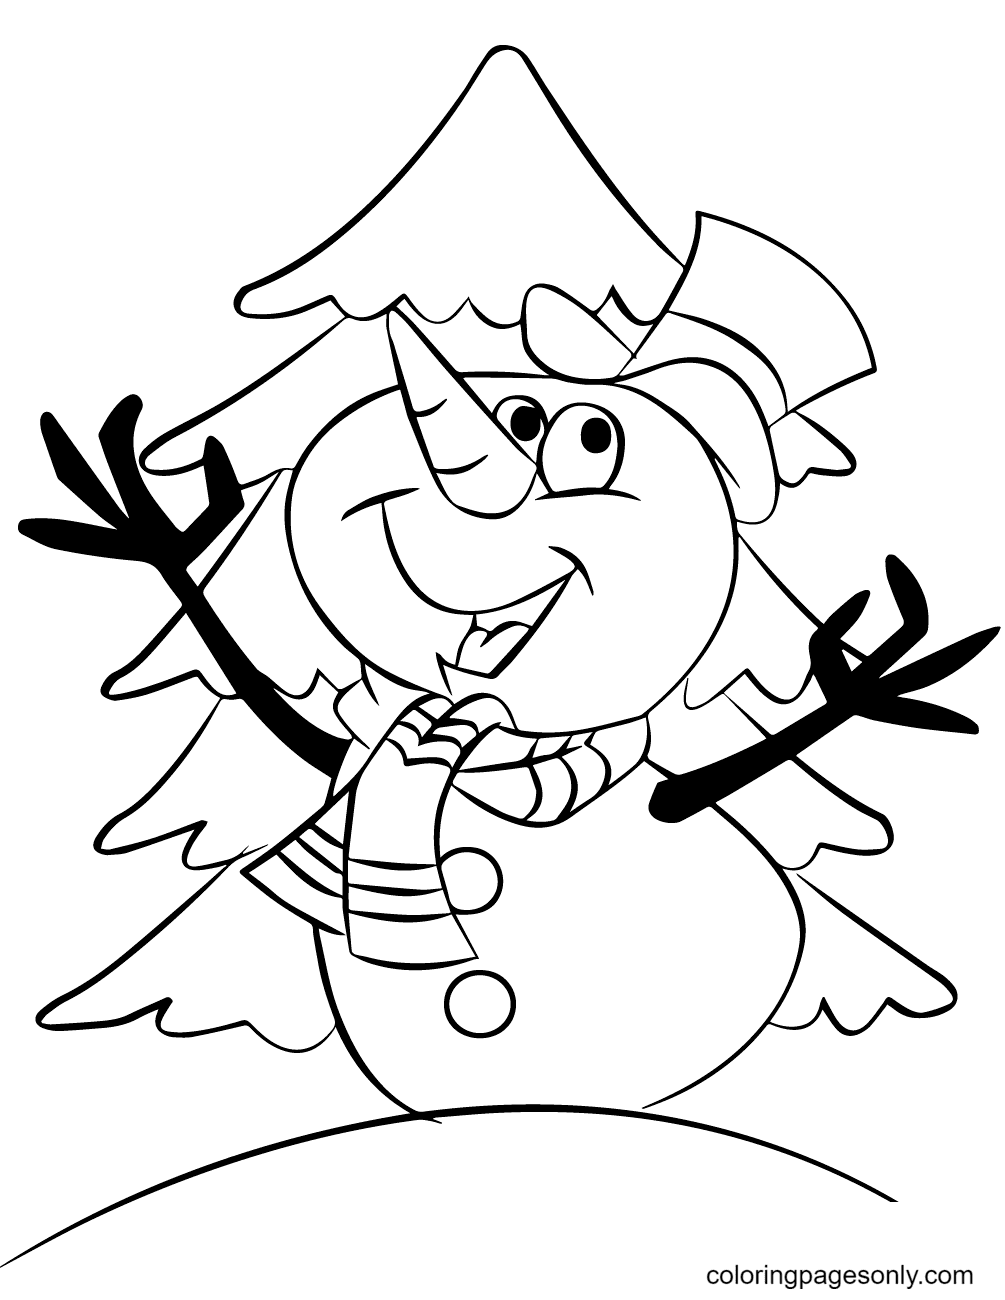 Happy Cartoon Snowman Coloring Pages